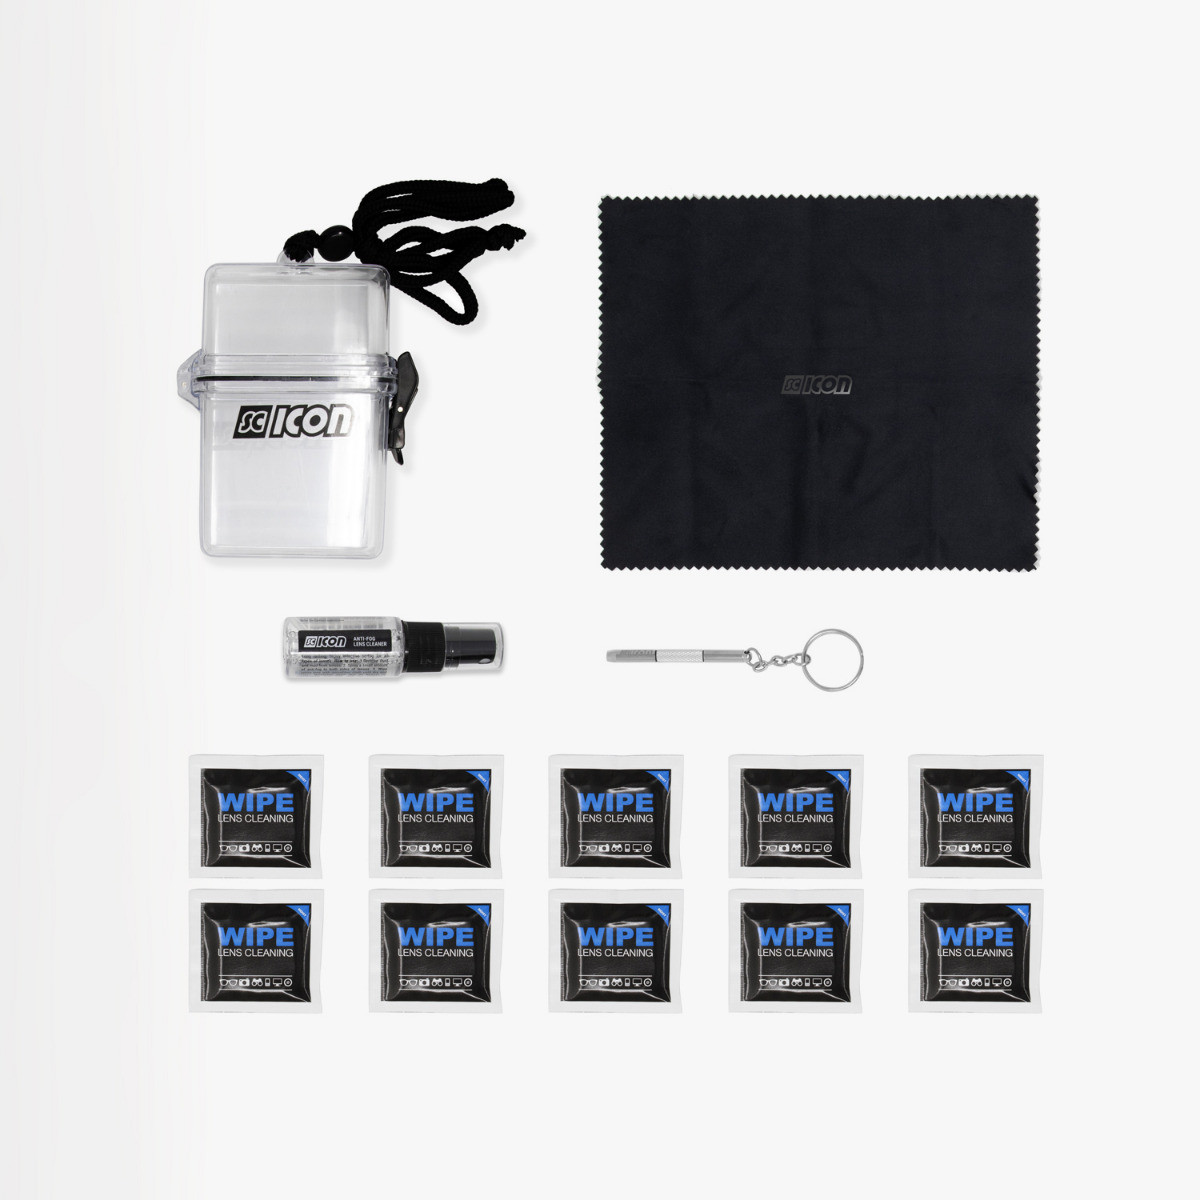 GLASSES AND LENS CLEANING KIT